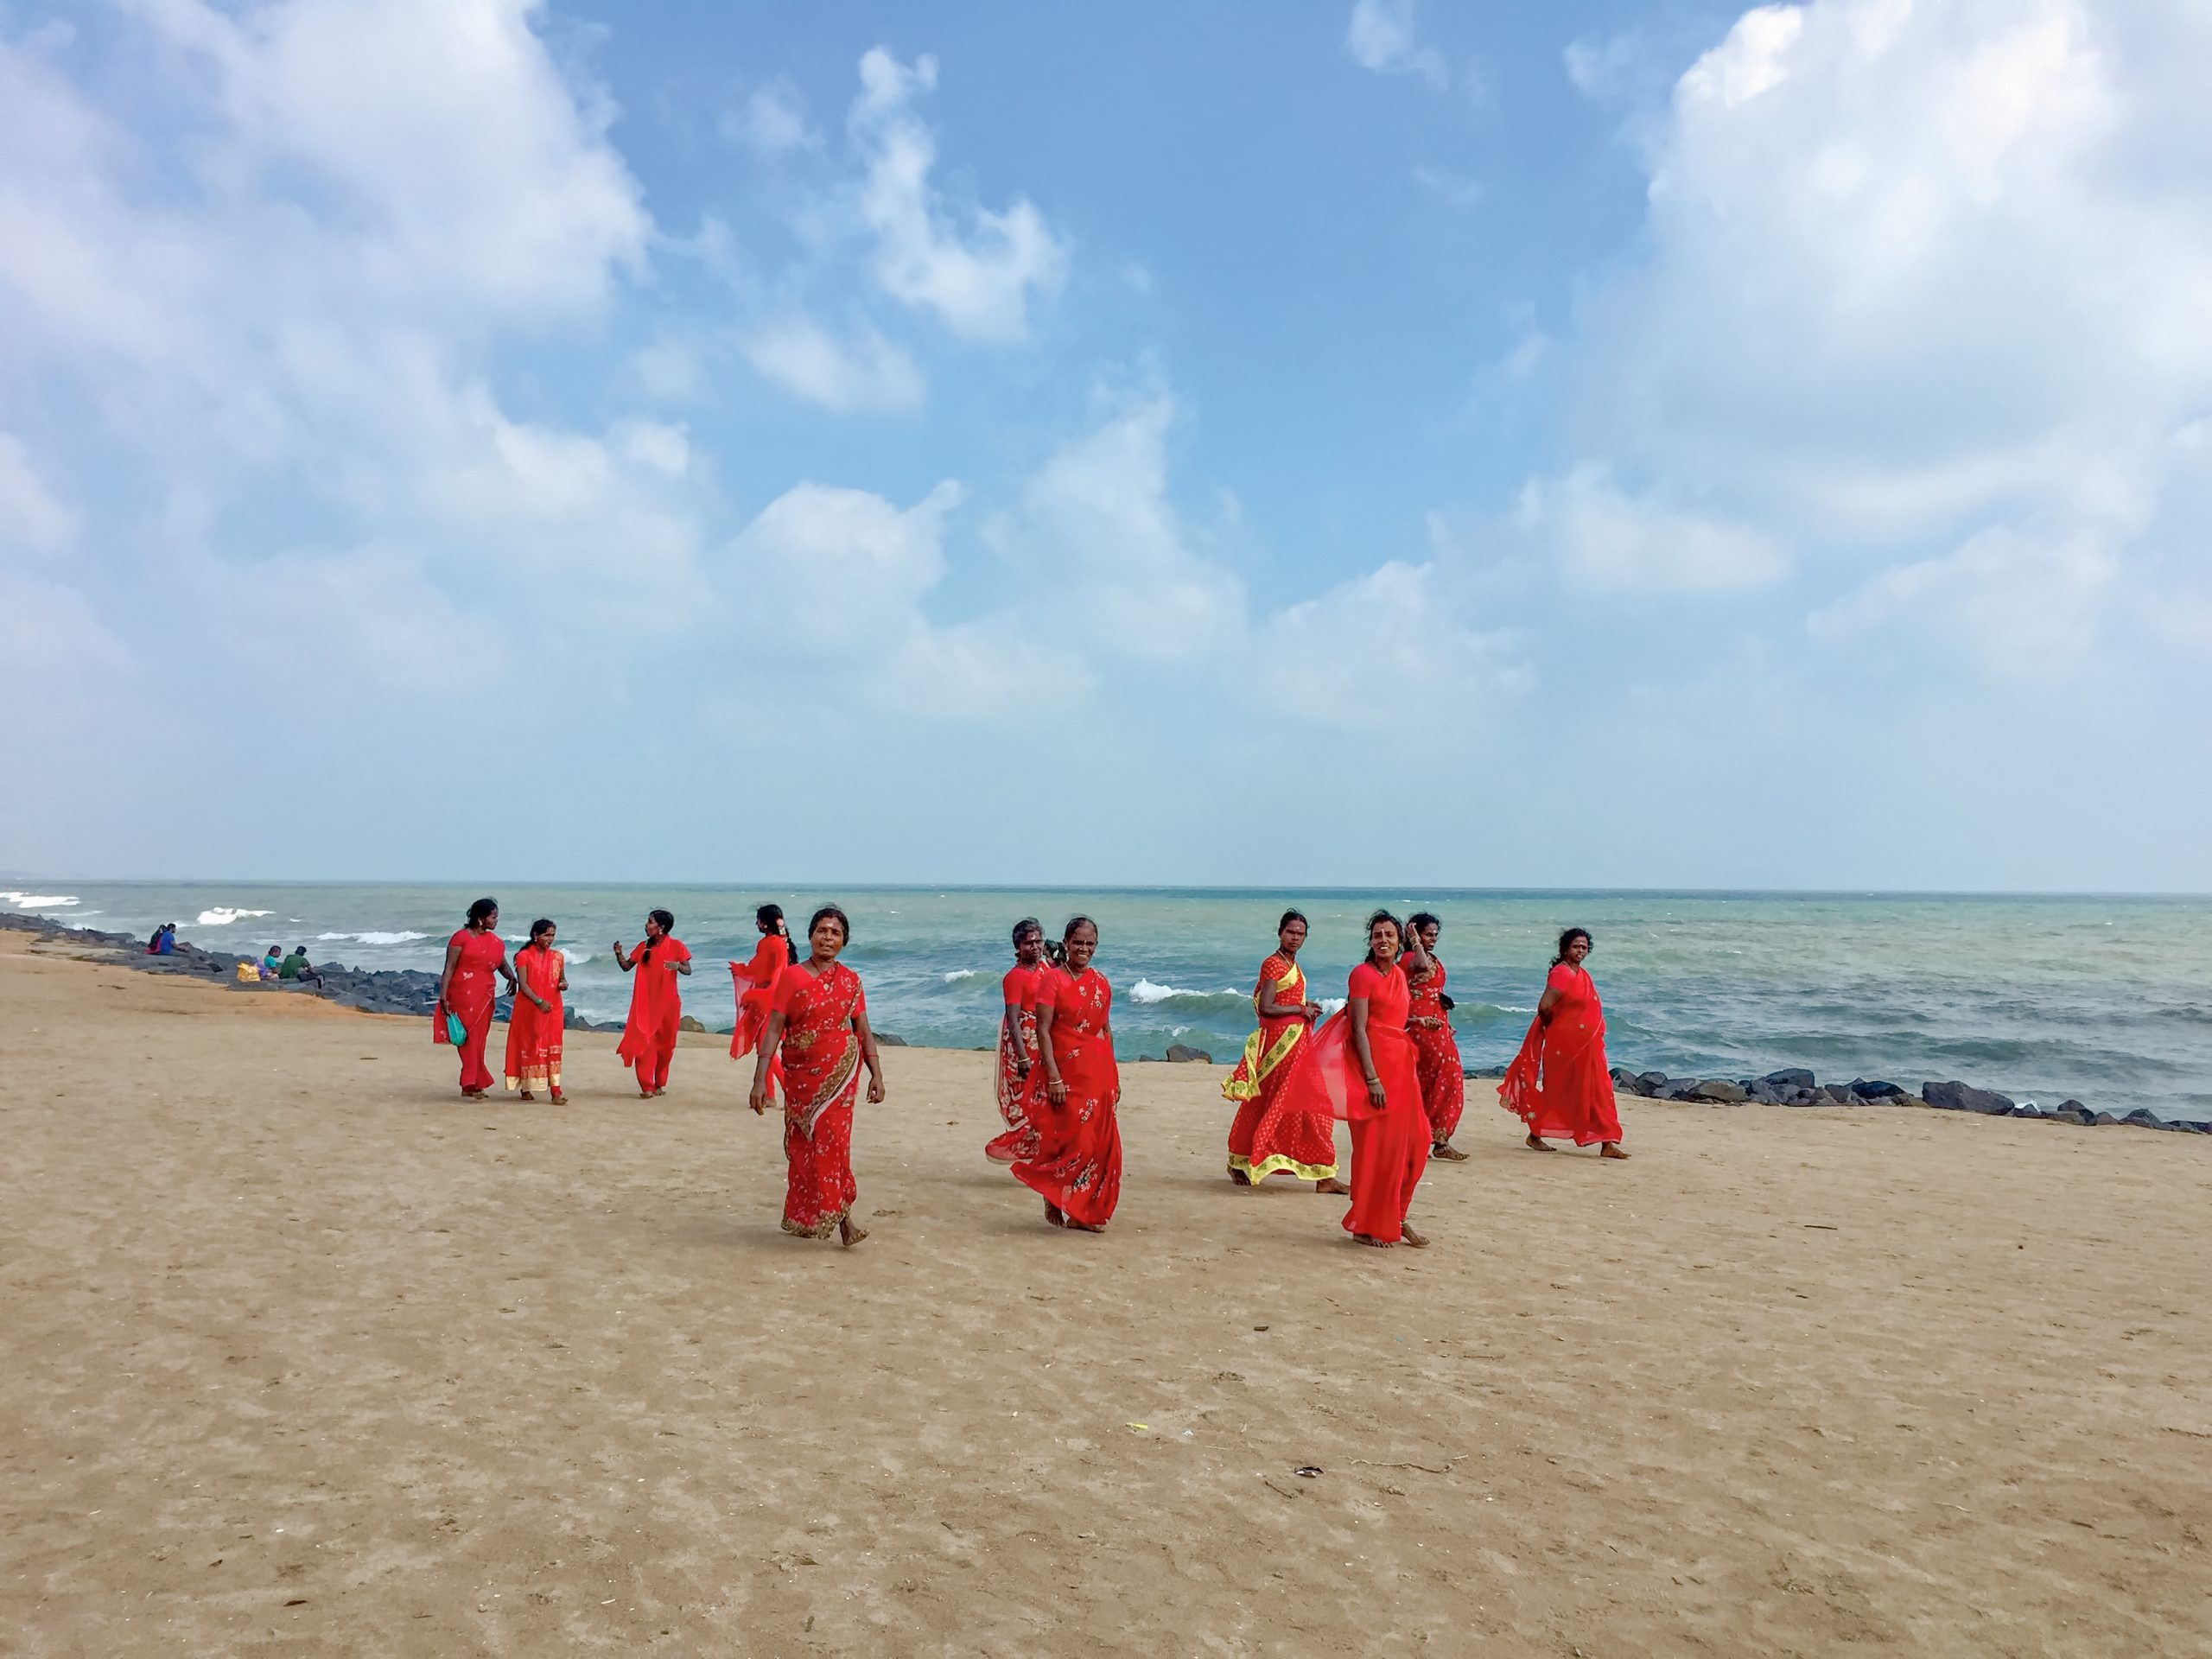 Women in red robes on a beach